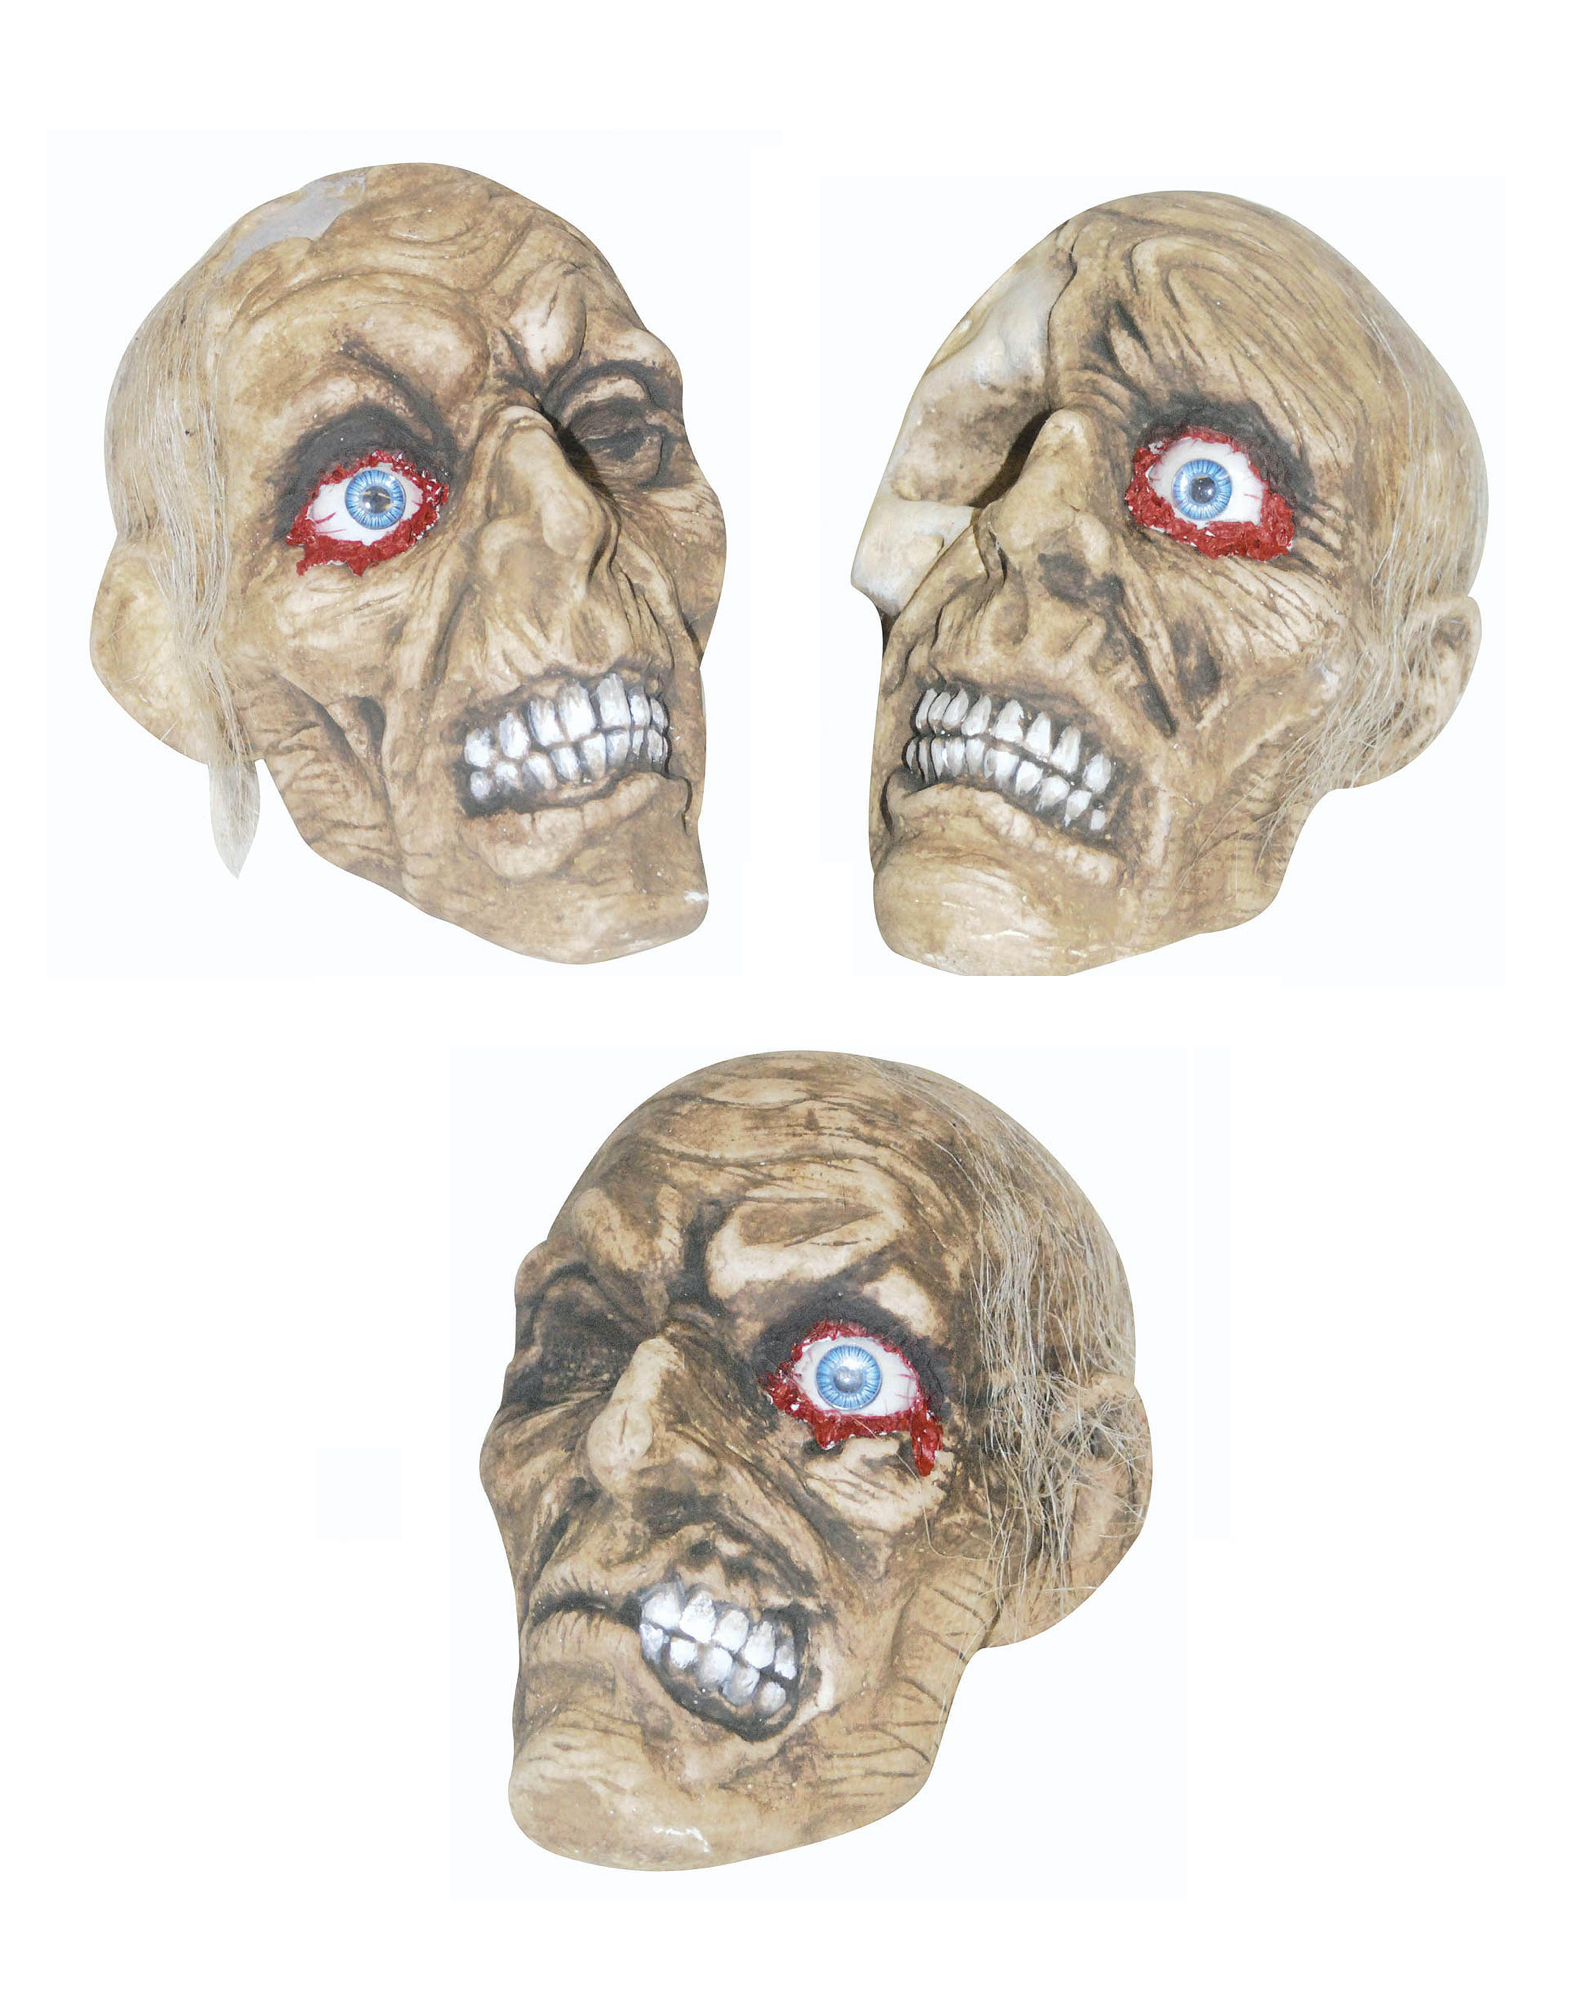 Smiffys Men's Decaying Zombie Mask with Hair